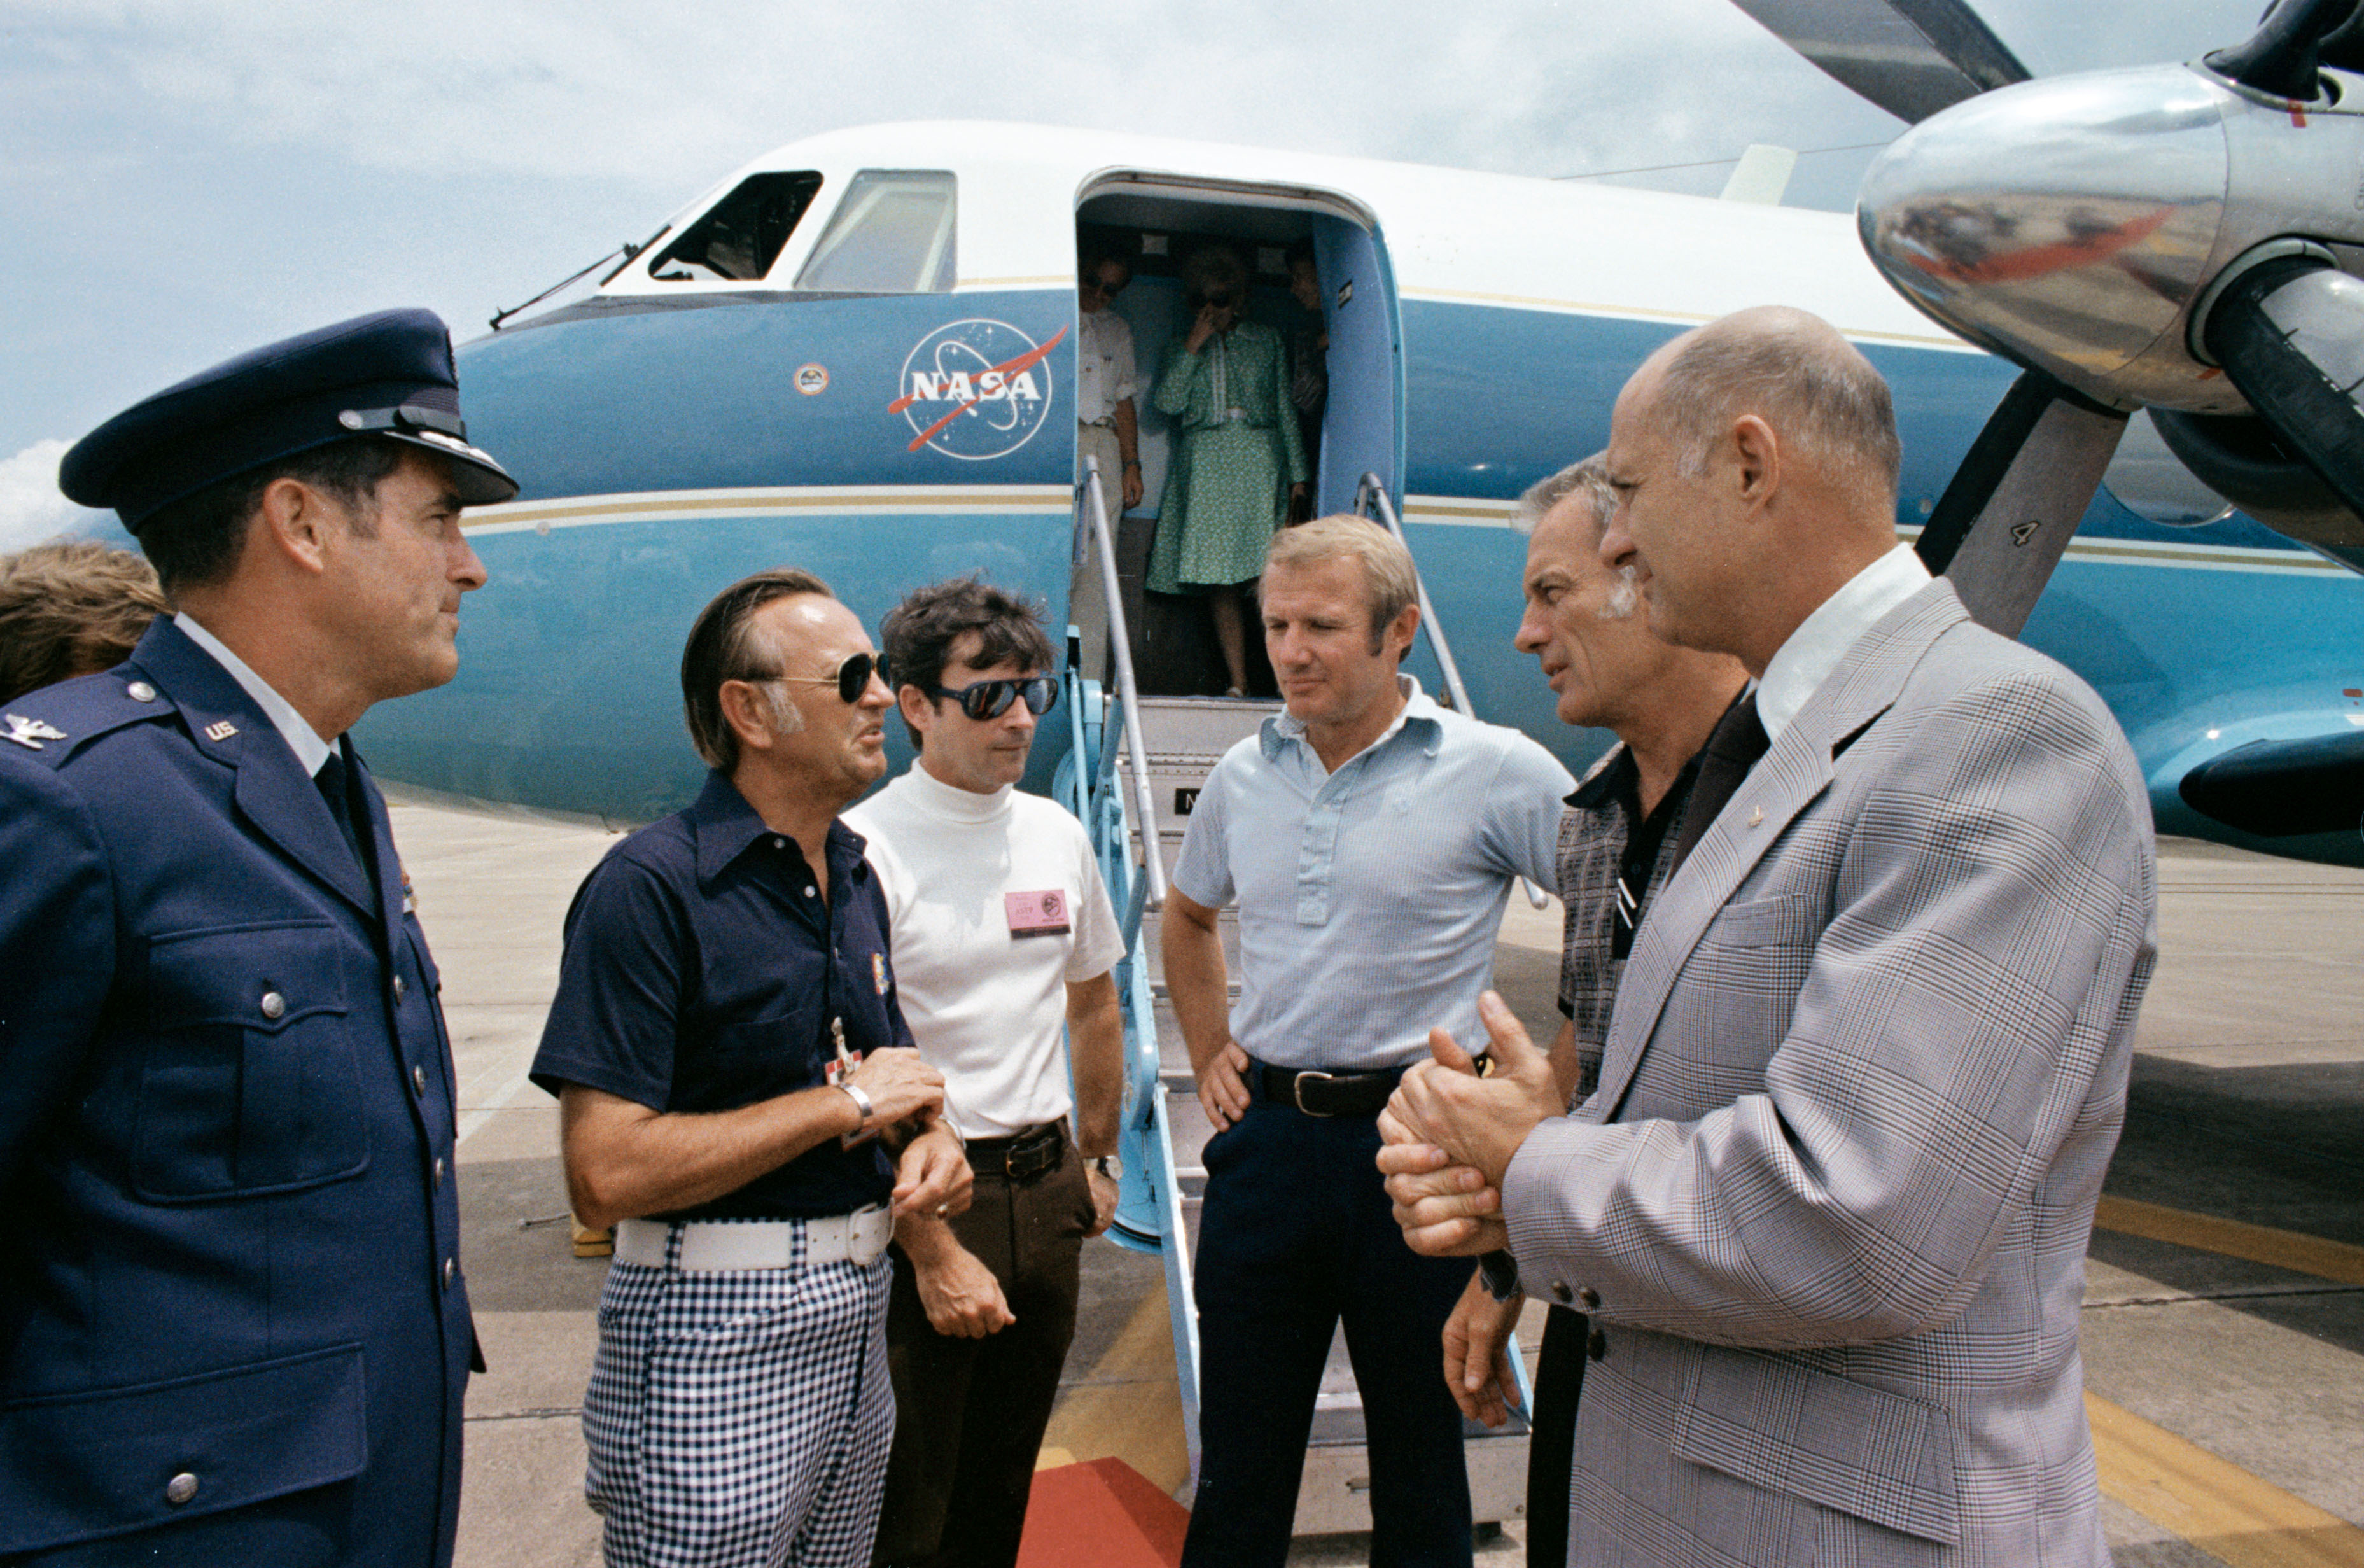 Officials greet the returned Apollo crew at Ellington Air Force Base on 10 August 1975. Left to right are base commander, Col. Donald Robinson, Johnson Space Center (JSC) Director Chris Kraft, Chief Astronaut John Young and Apollo crewman Vance Brand, Deke Slayton and Tom Stafford. Photo Credit: NASA